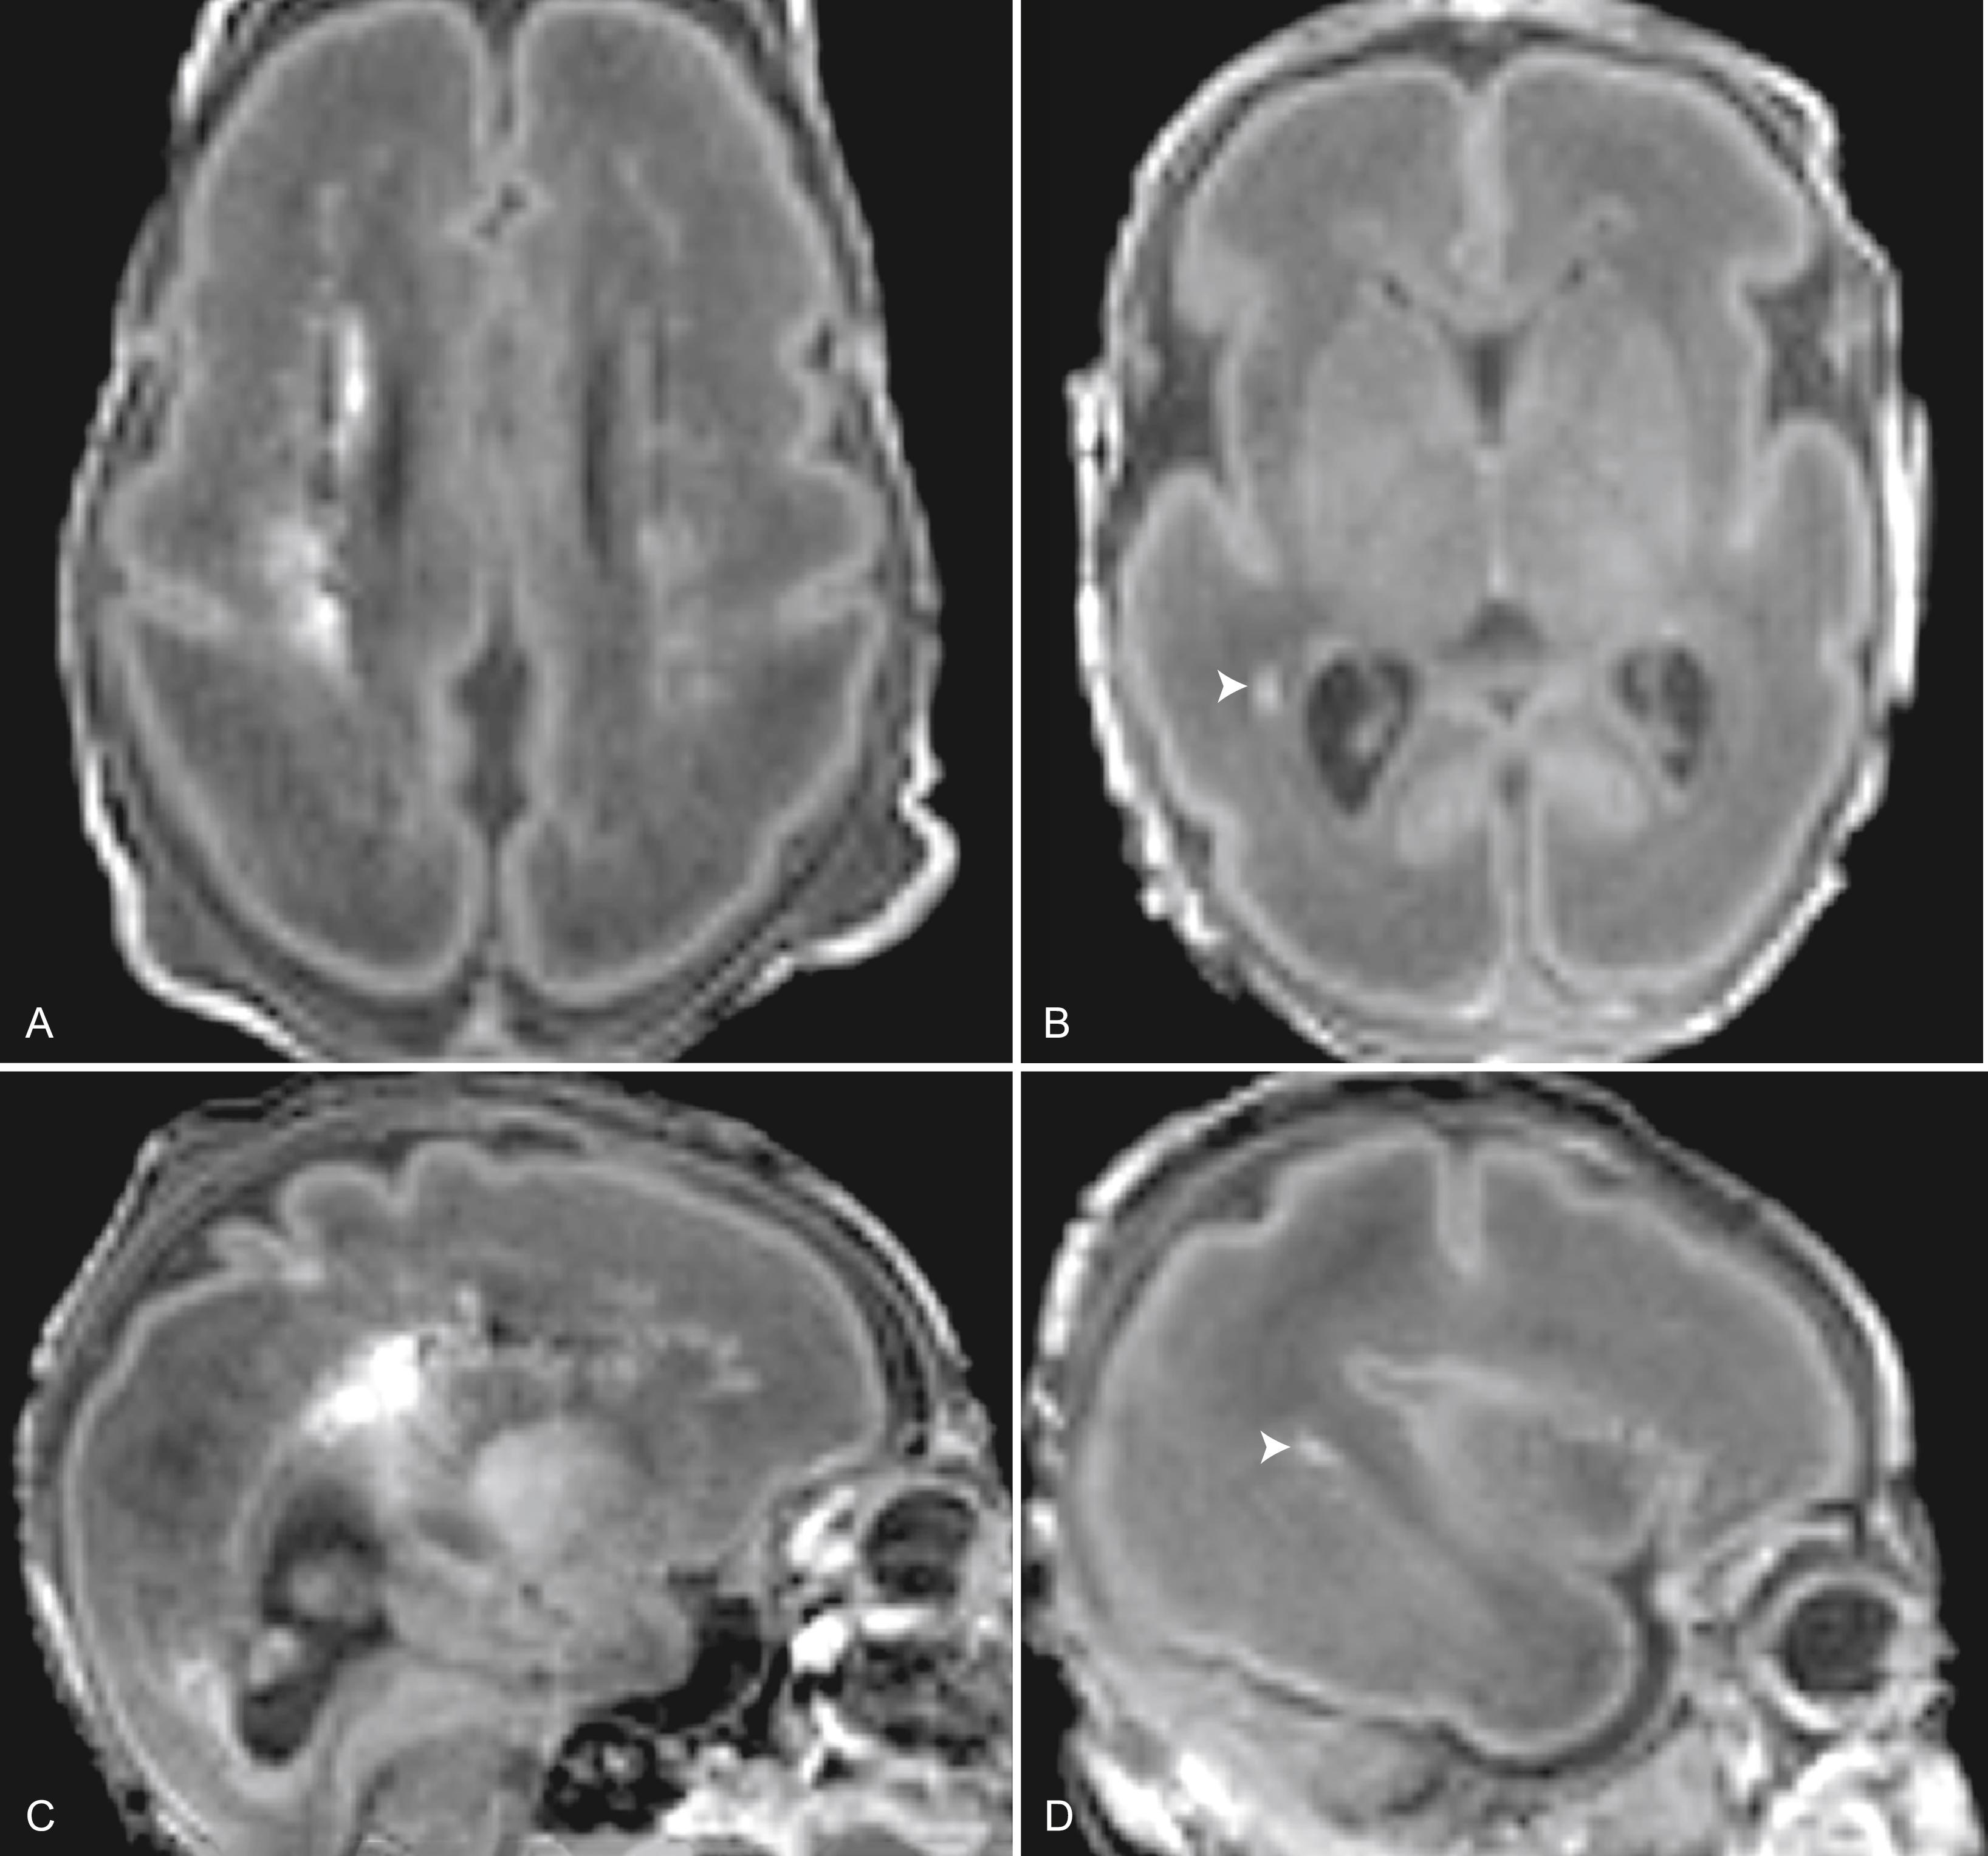 Fig. 110.8, Different Severities of White Matter Injury in the Preterm Neonate. (A and C) Appearance of cystic necrotic white matter injury on magnetic resonance imaging (MRI). Small areas of cavitation are appreciated as hypointensity on the sagittal T1-weighted image. (B and D) Punctate white matter injury on MRI has the appearance of signal hyperintensities on T1 (arrowheads) .